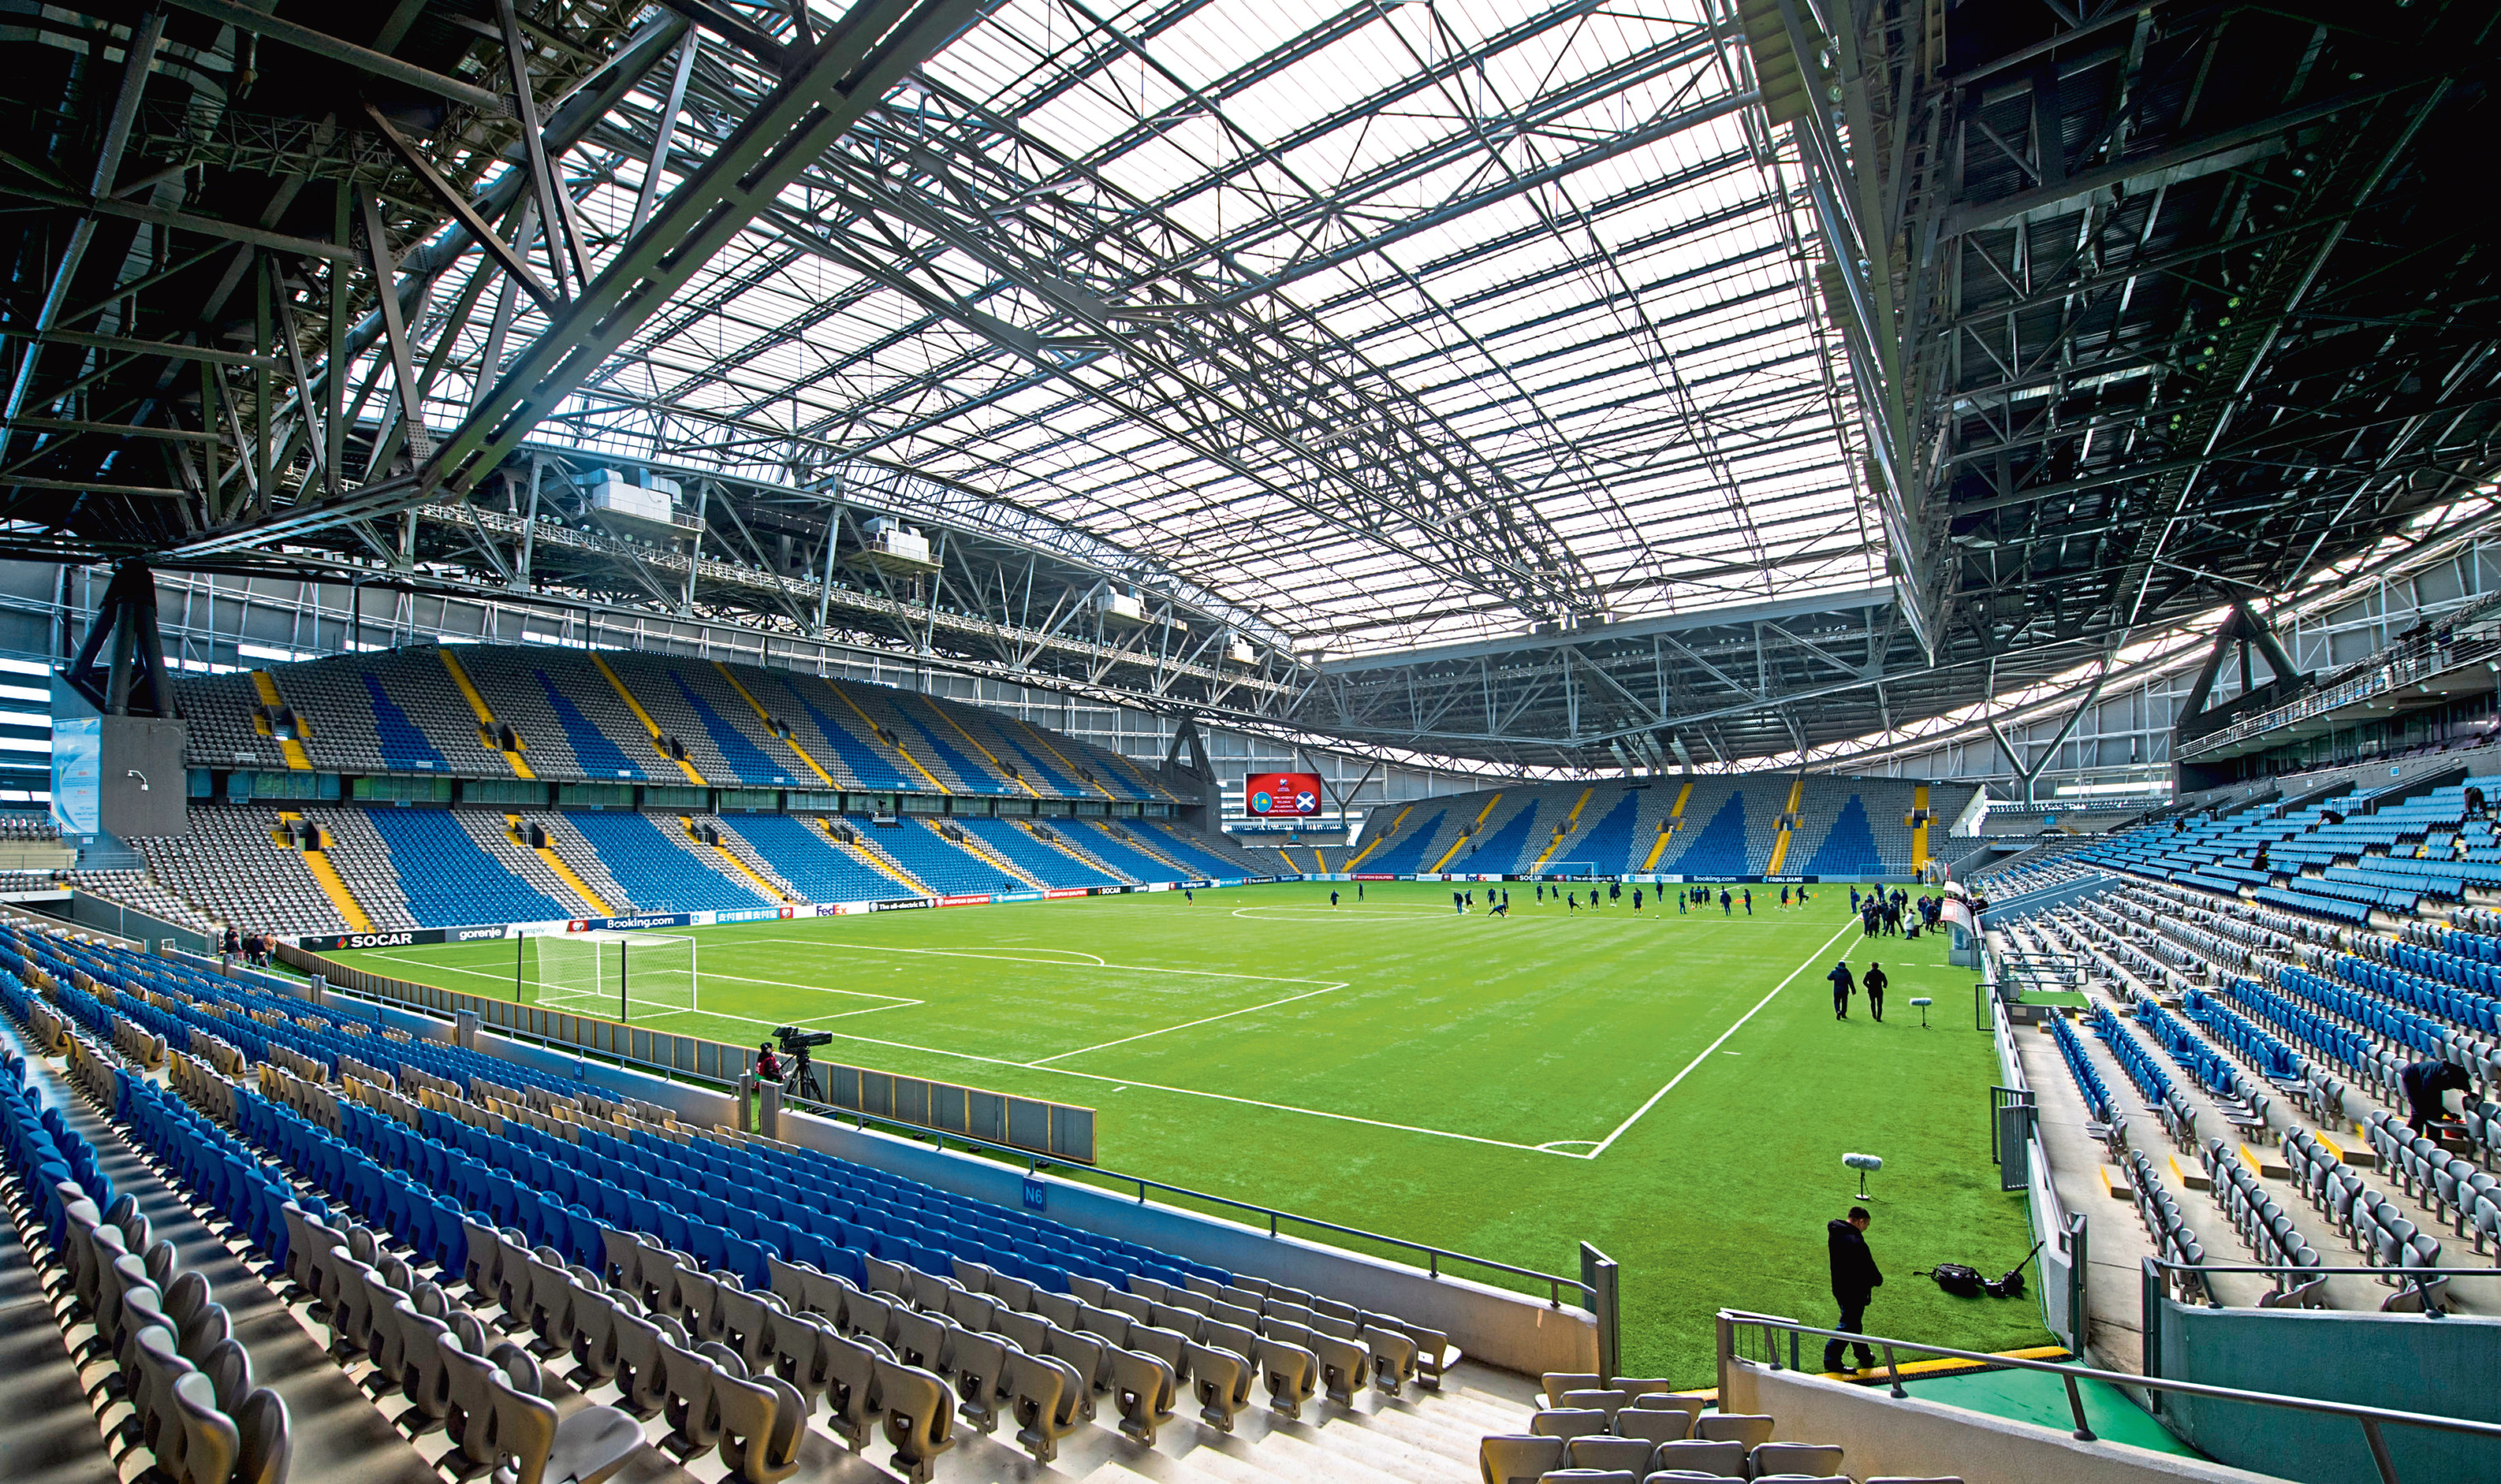 A general view of the Astana Stadium